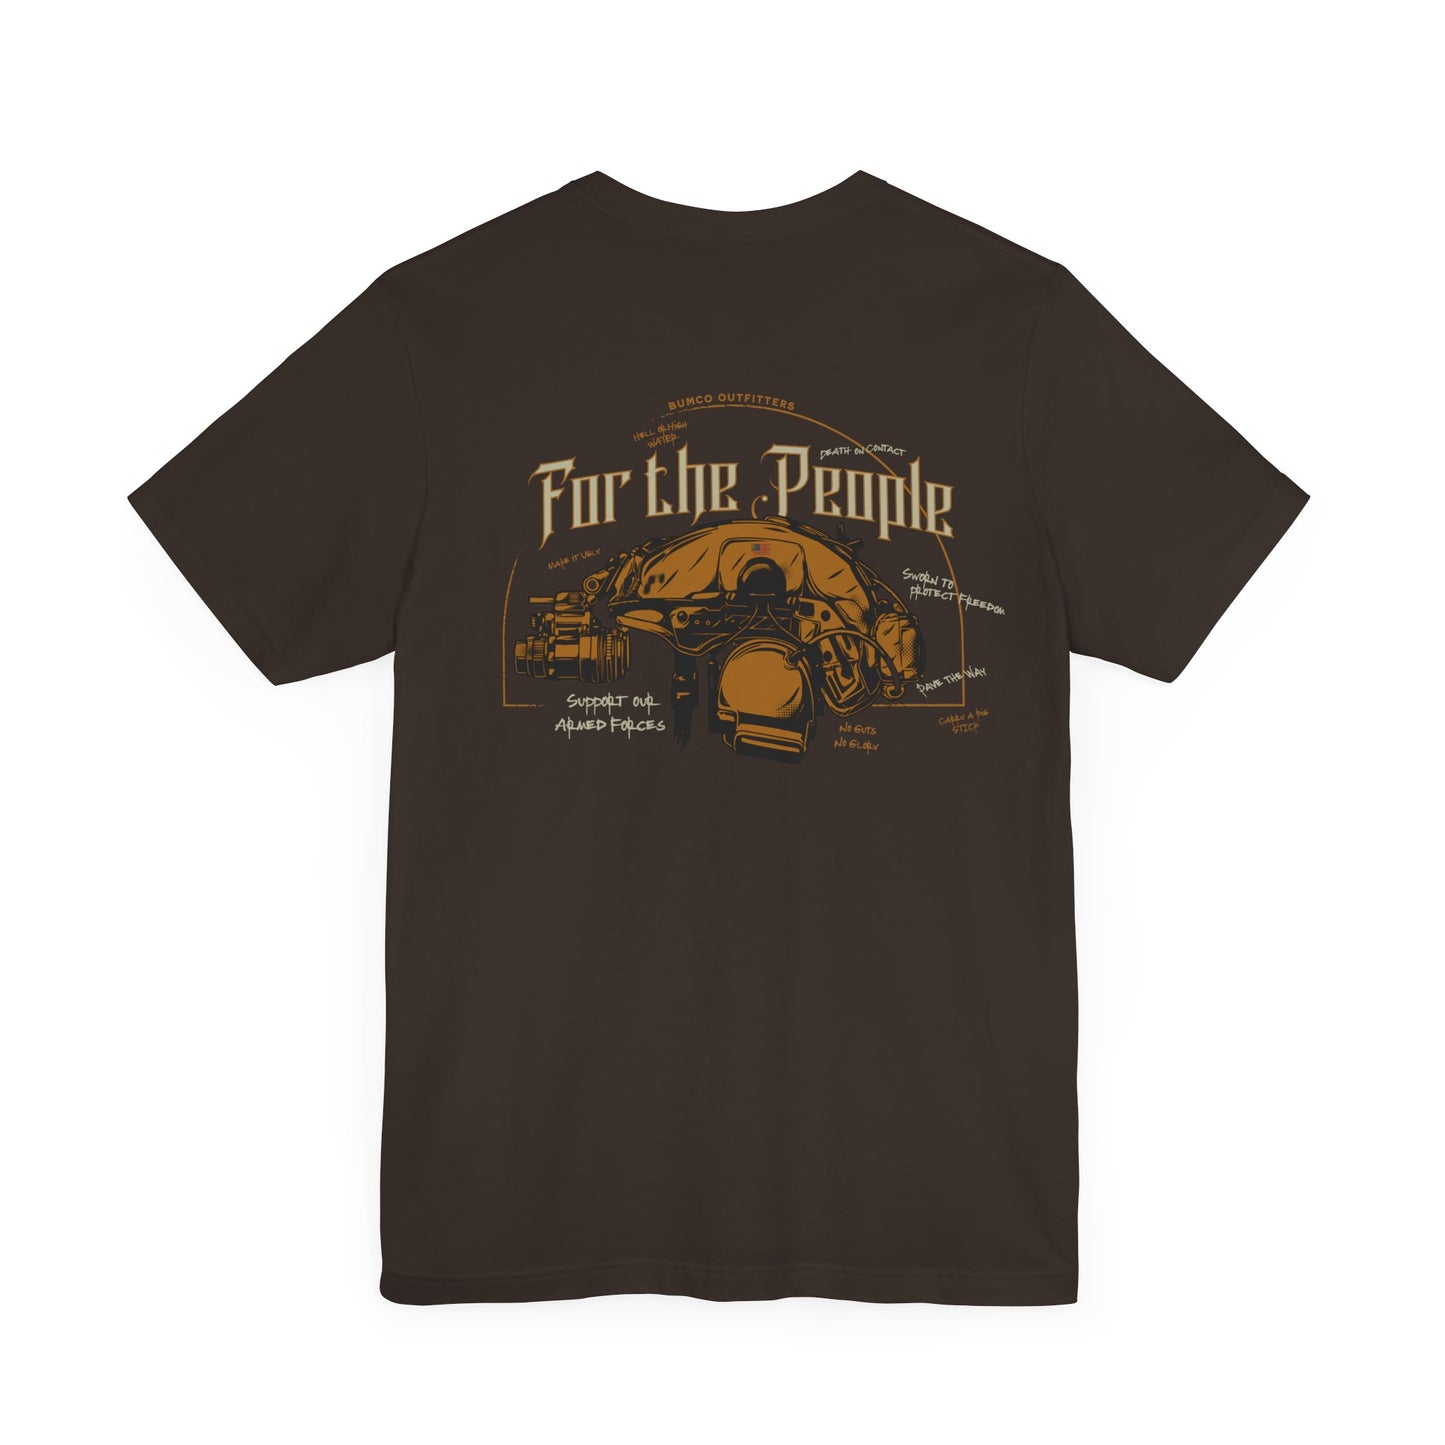 For the People - T-Shirt